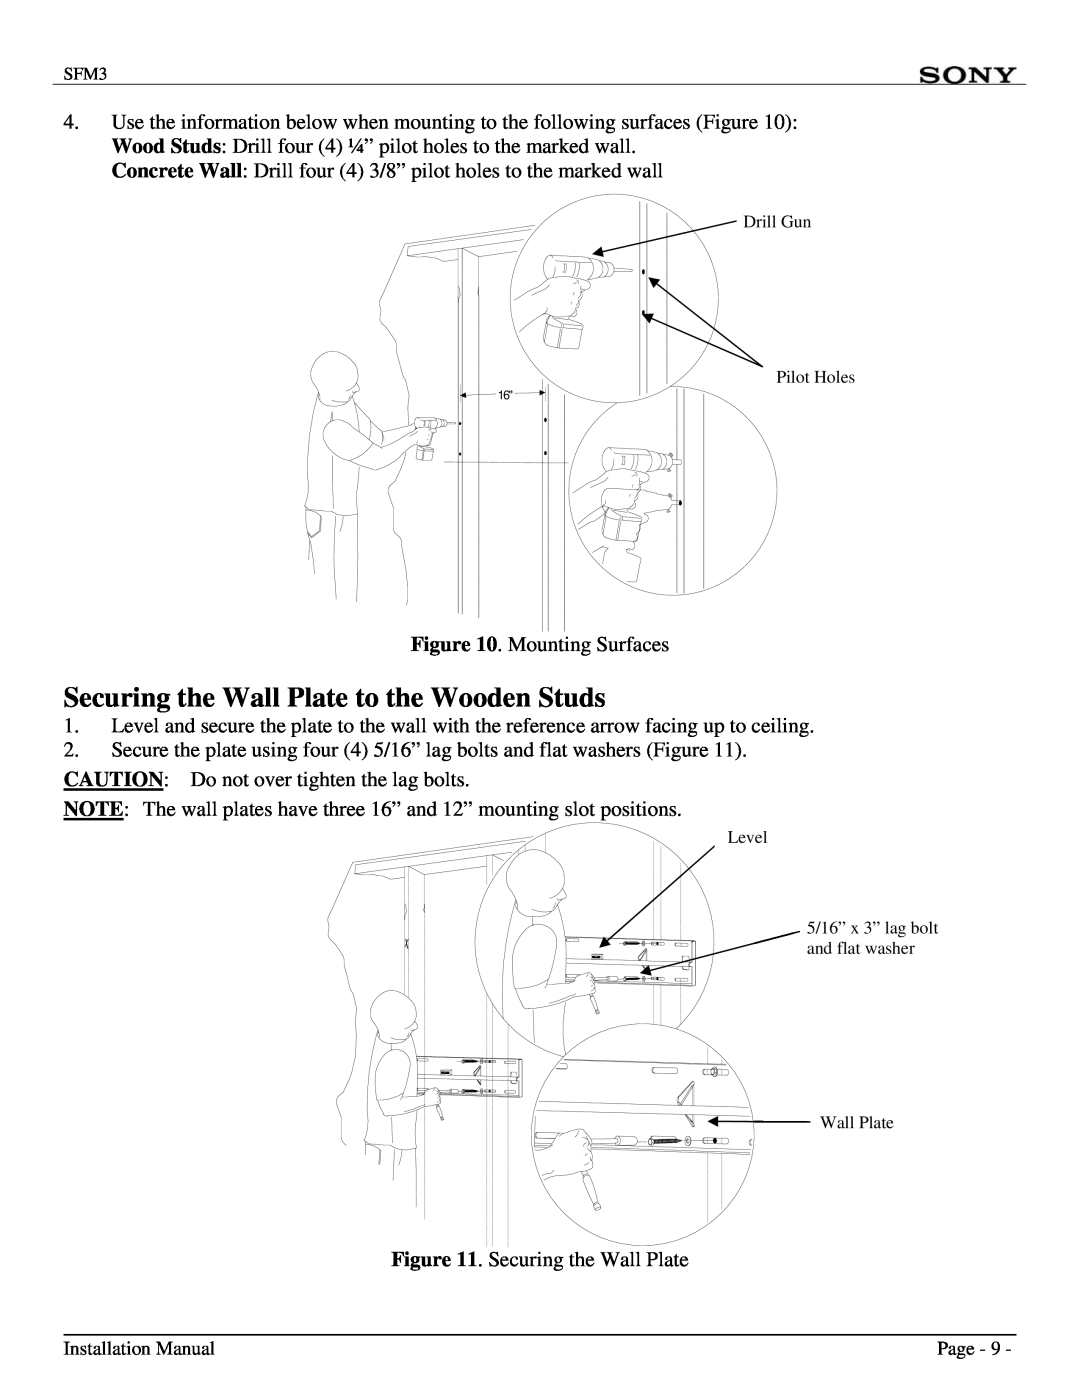 Sony SFM3 installation manual Securing the Wall Plate to the Wooden Studs 